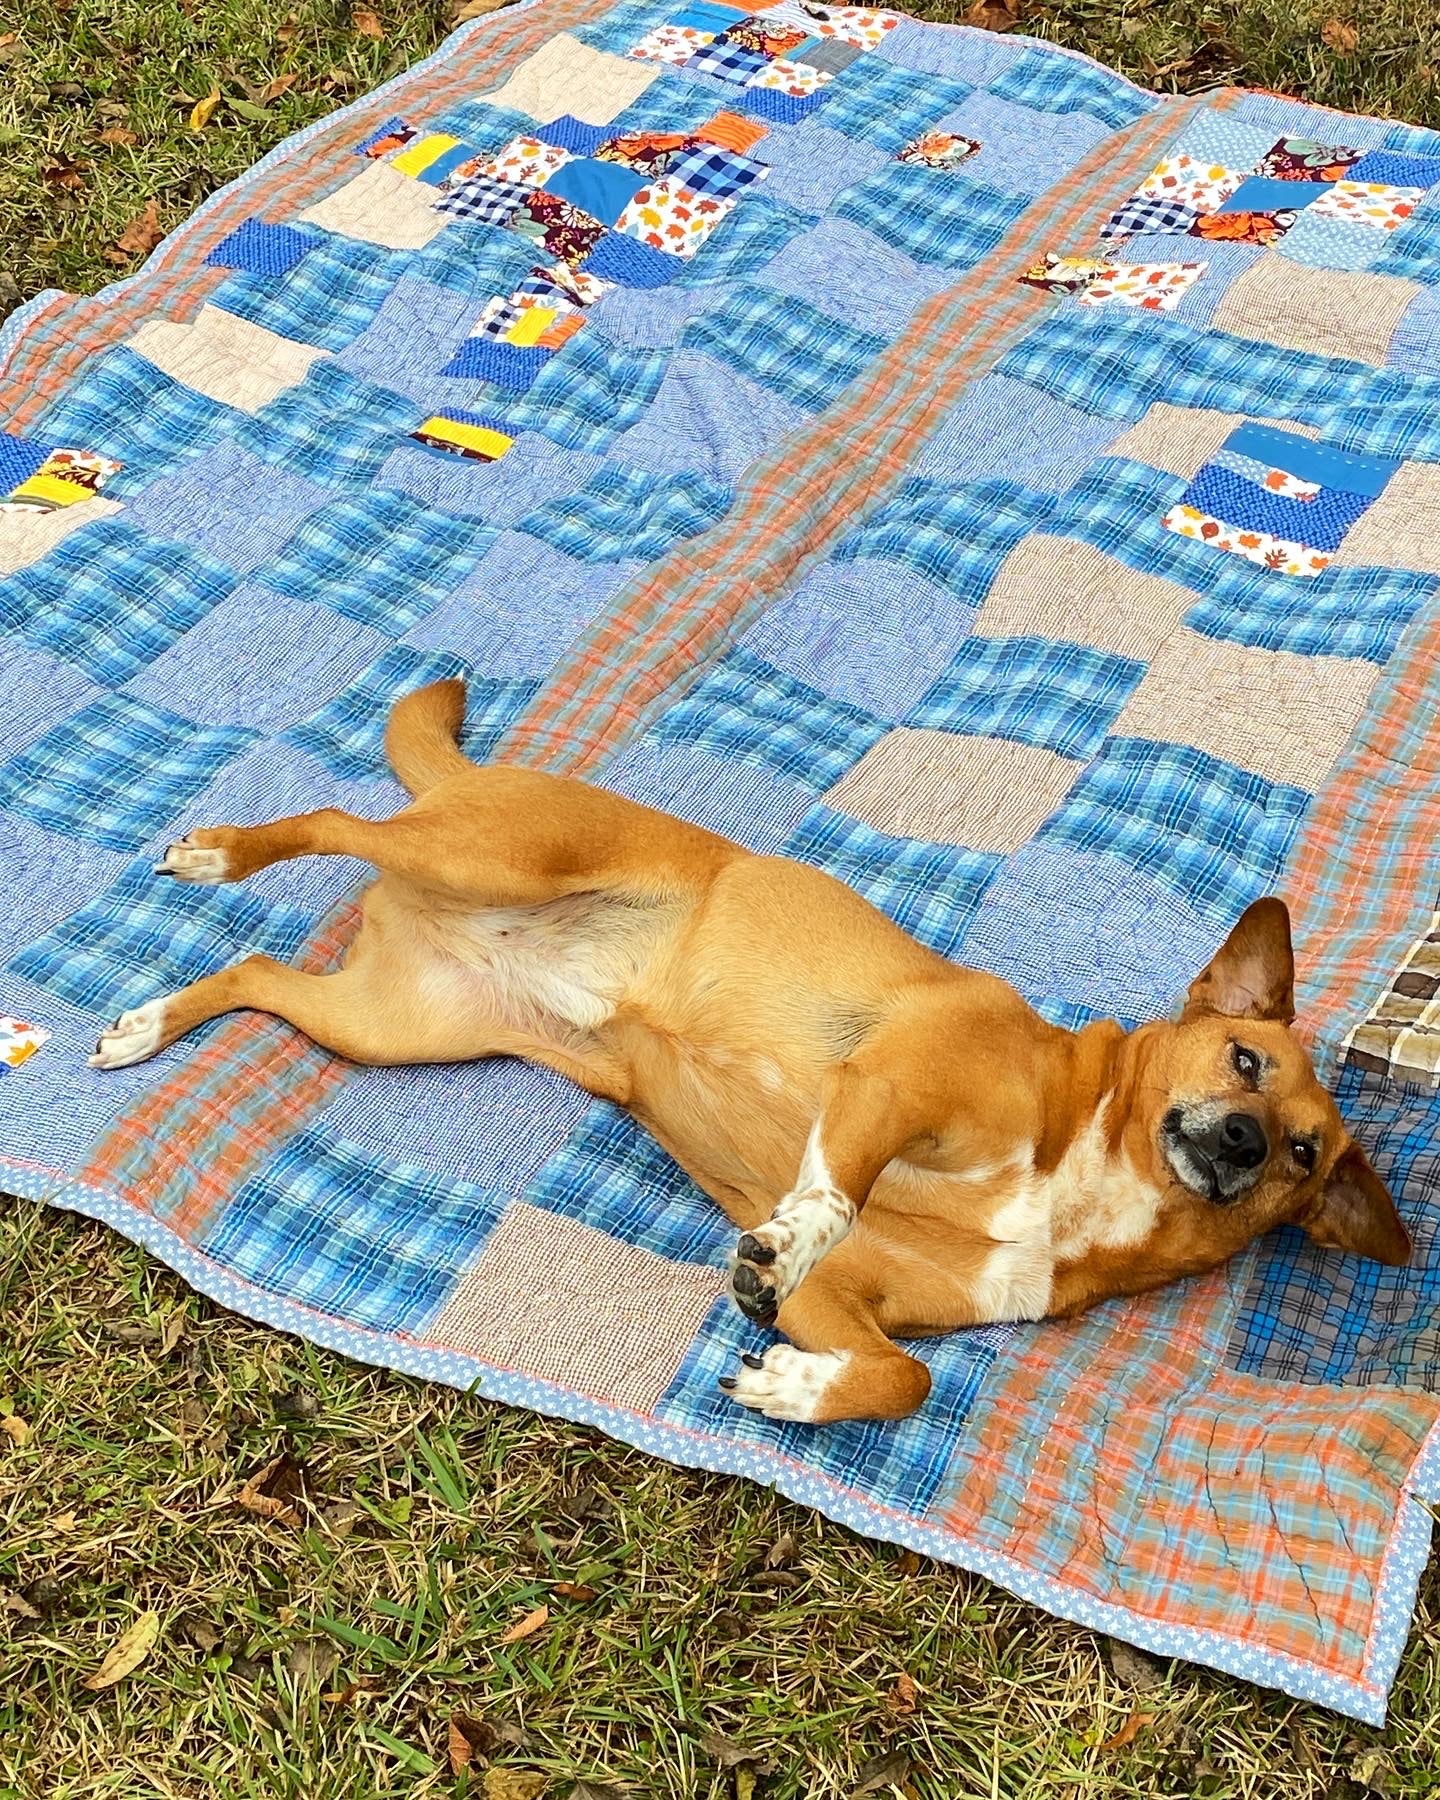 autumn blues antique quilt, on a lawn with odessa the dog as supermodel on top of quilt